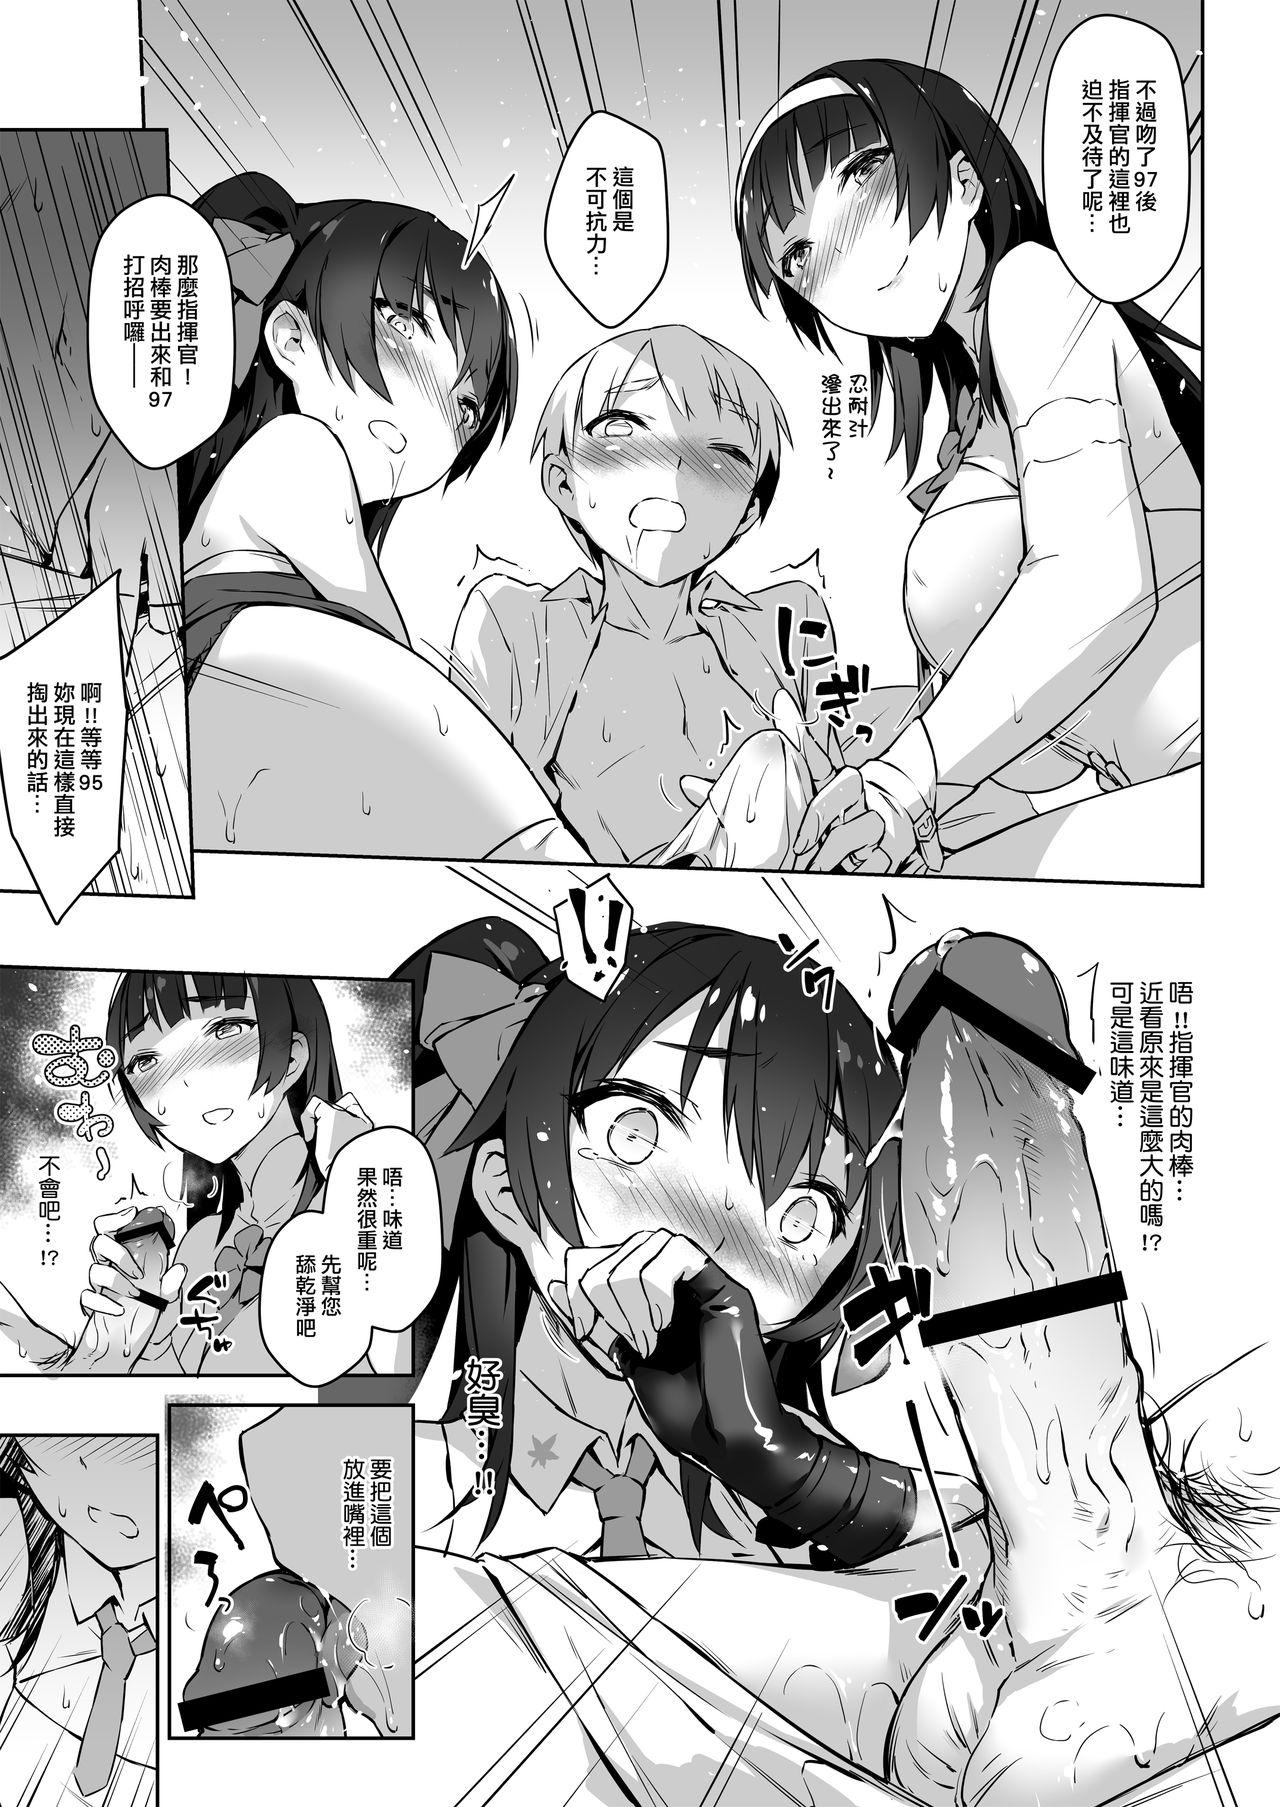 Best Blowjobs Ever Type 95 Type 97, Let Sister Teaches You!! - Girls frontline Domina - Page 11